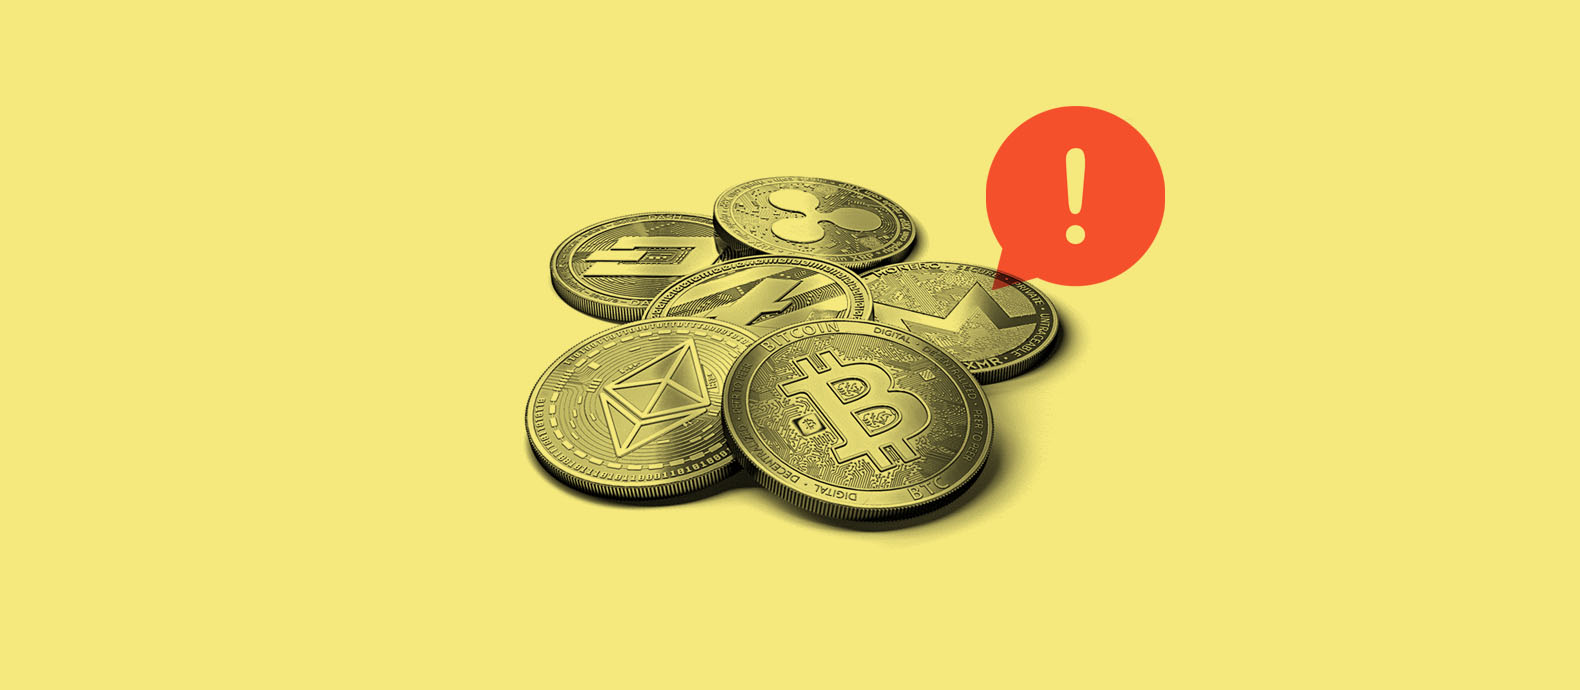 How to report crypto scams targeting your business